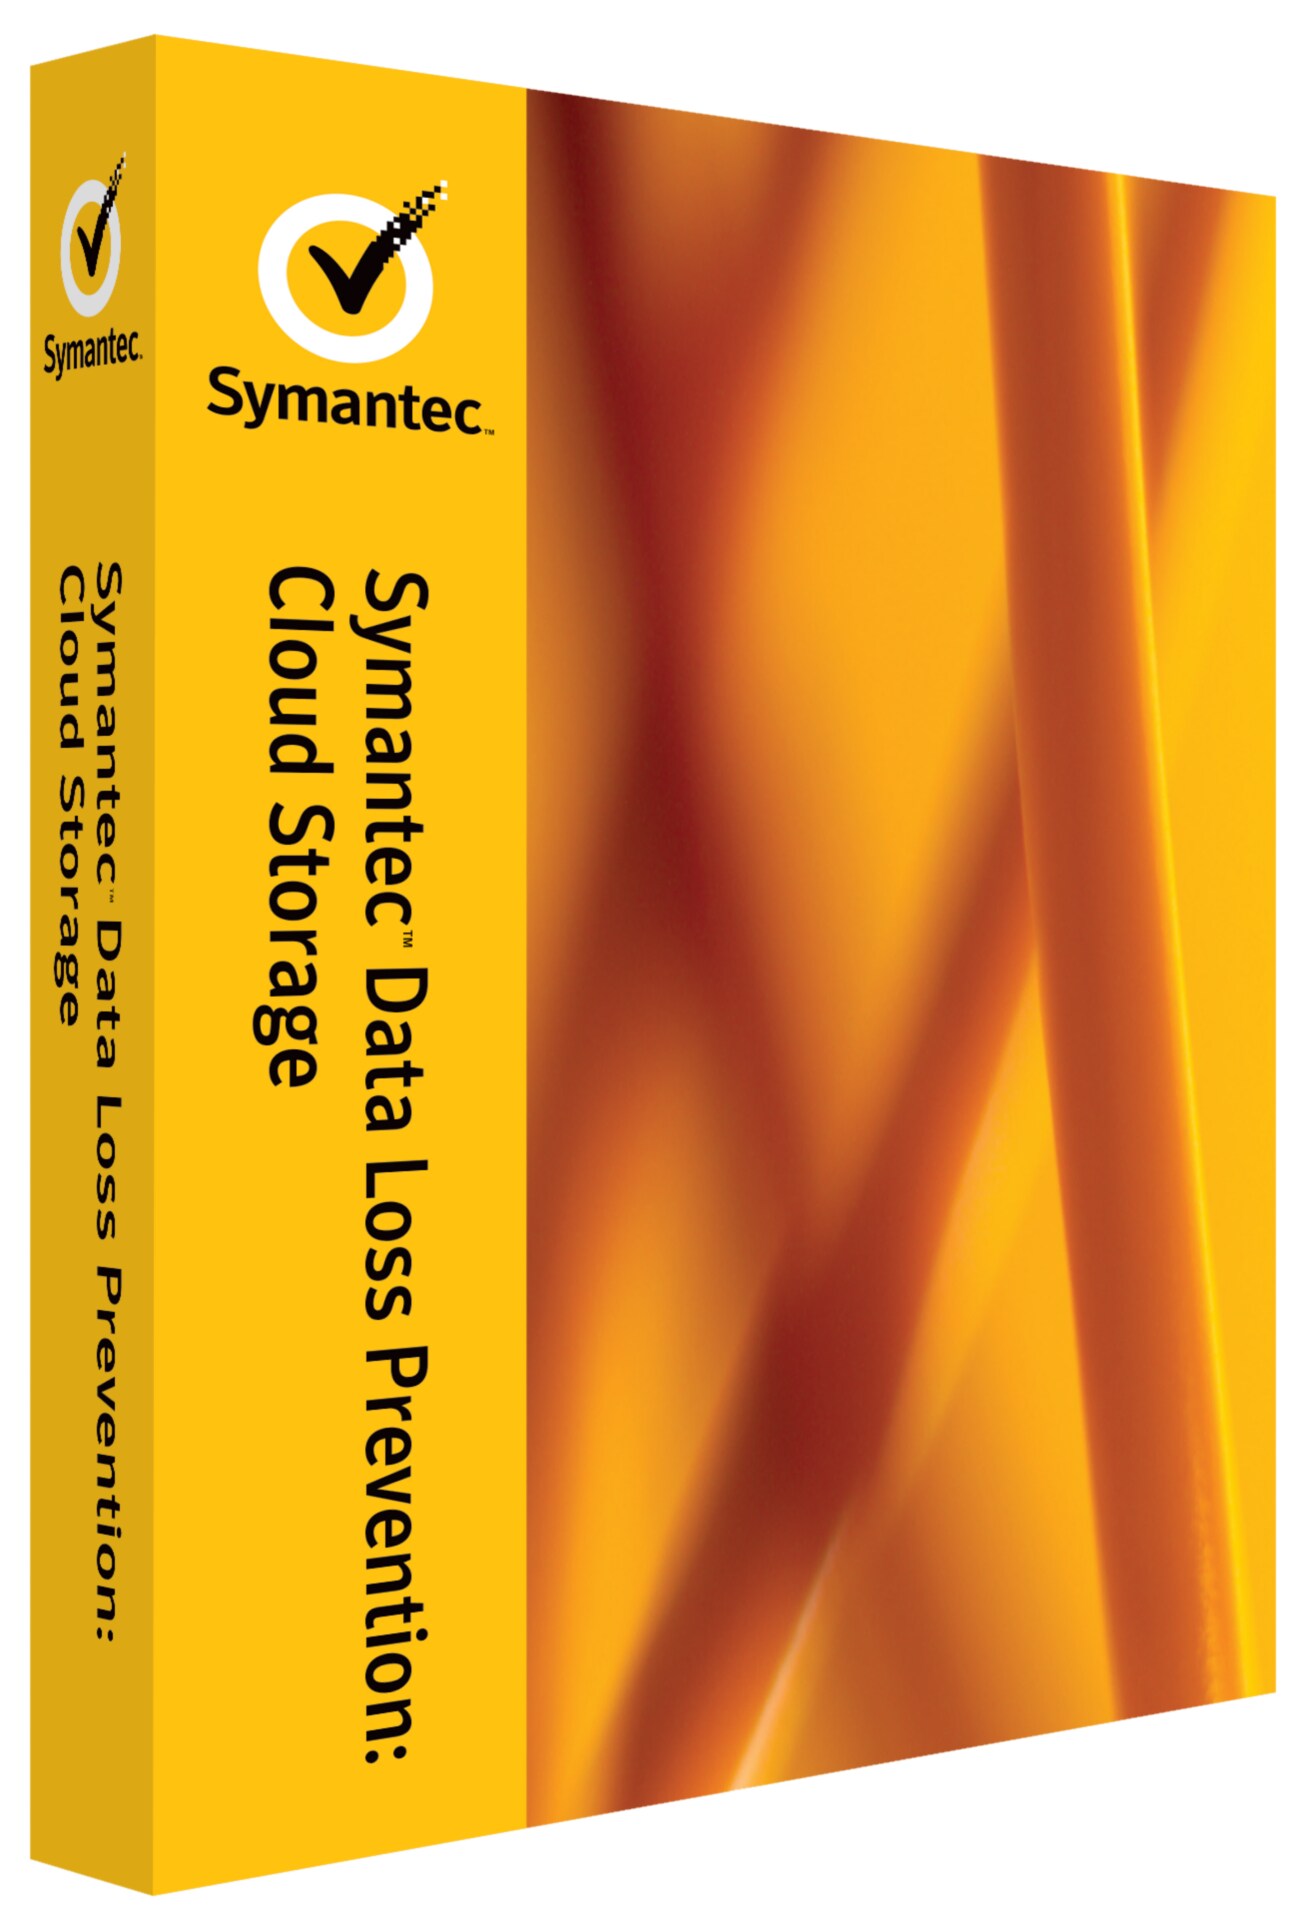 Symantec Data Loss Prevention Cloud Storage (v. 14.0) - subscription license (1 year) + 1 Year Essential Support